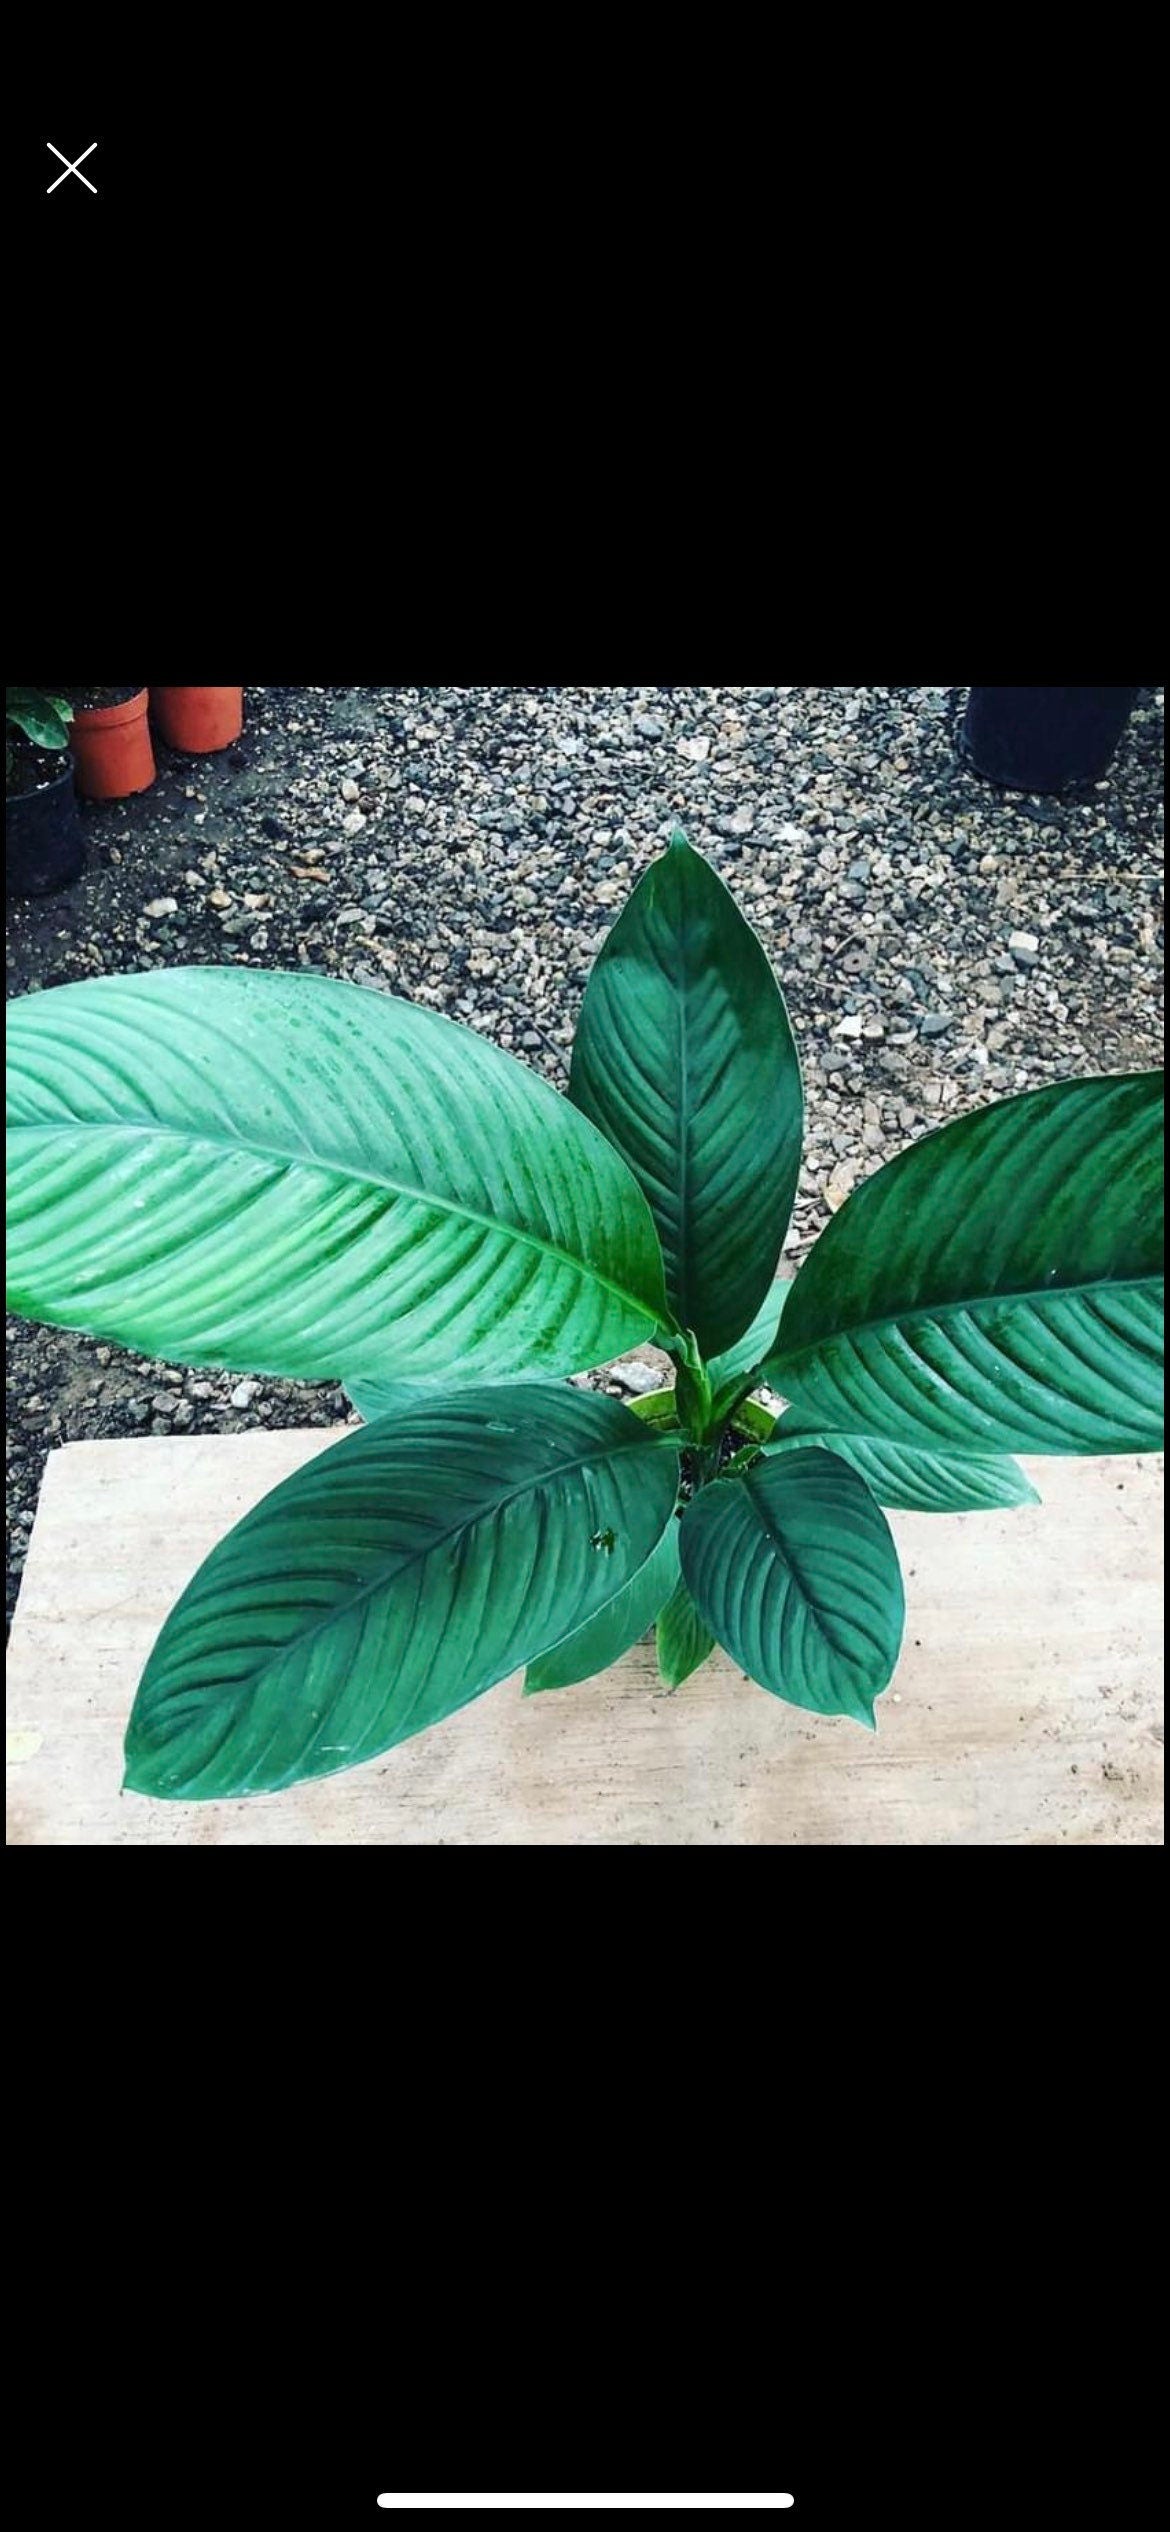 1 ft tall -Spathiphyllum Sensation Largest Peace Lily - Live Indoor air purifying plant-6 inch pot-rare hard to find this size